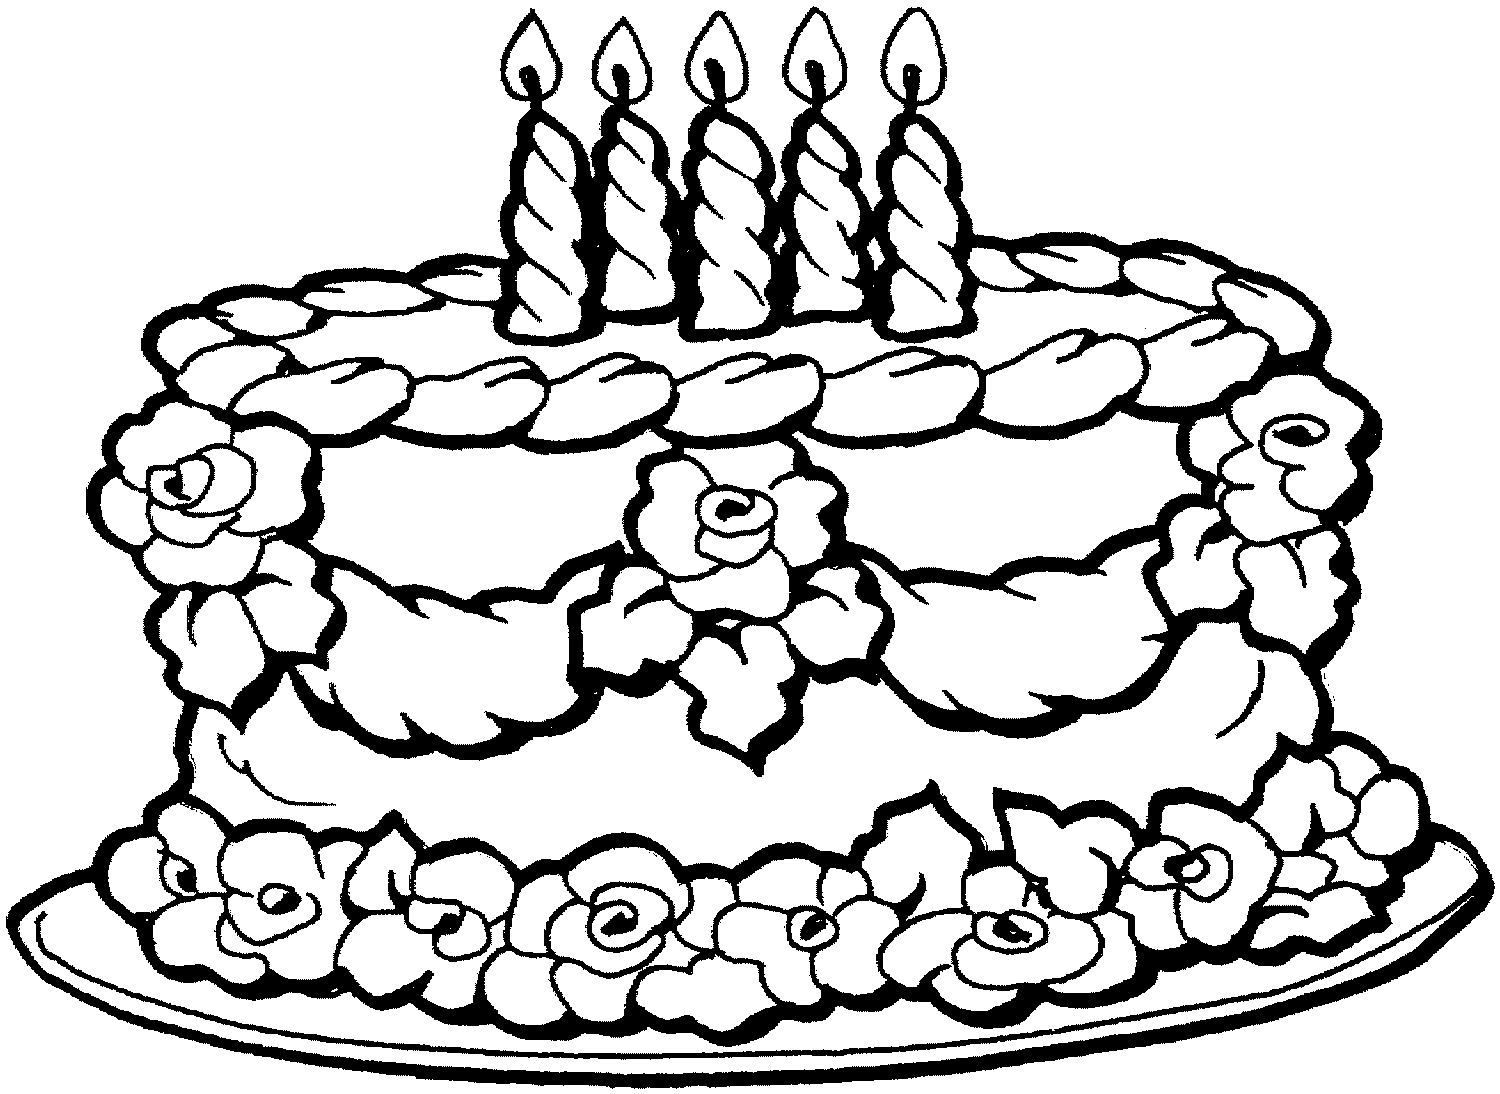 1490211 disney birthday coloring pages - Gianfreda.net